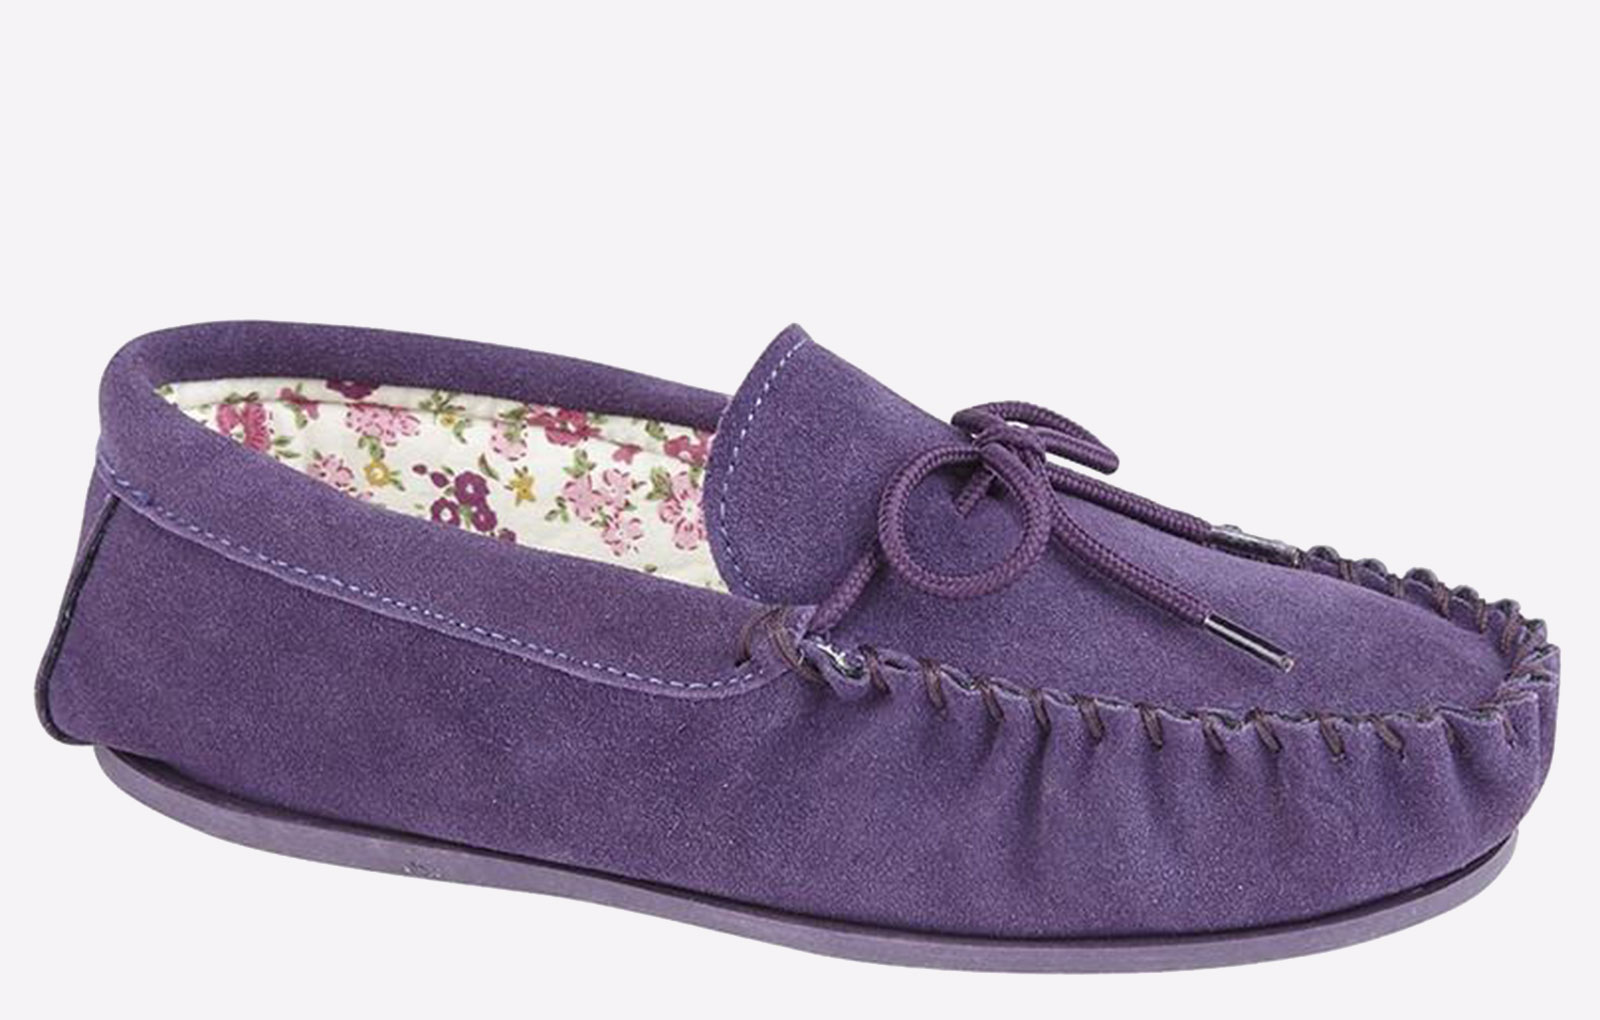 Mokkers Lily Moccasin Slippers Womens - ZZ-GBD-1676